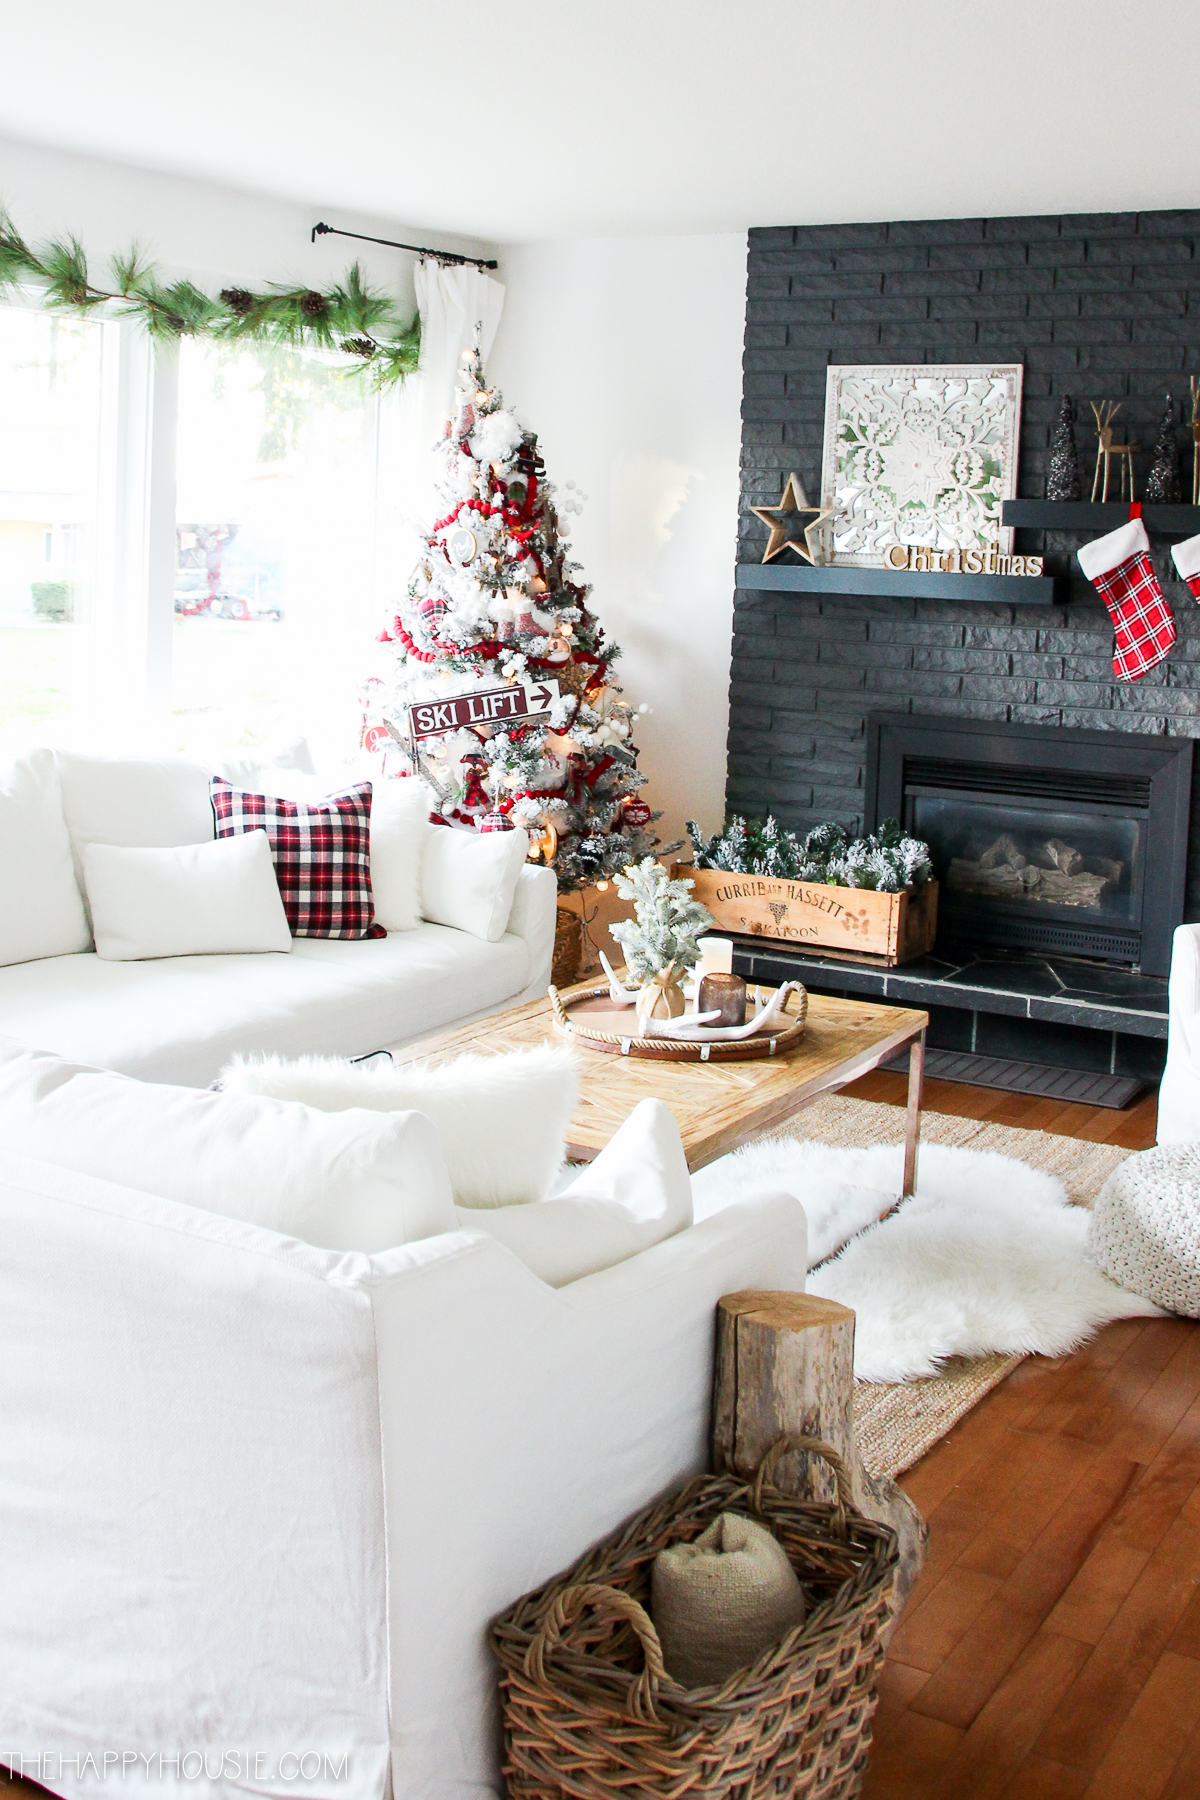 White neutral couches, a dark grey fireplace and stone and wood floors.